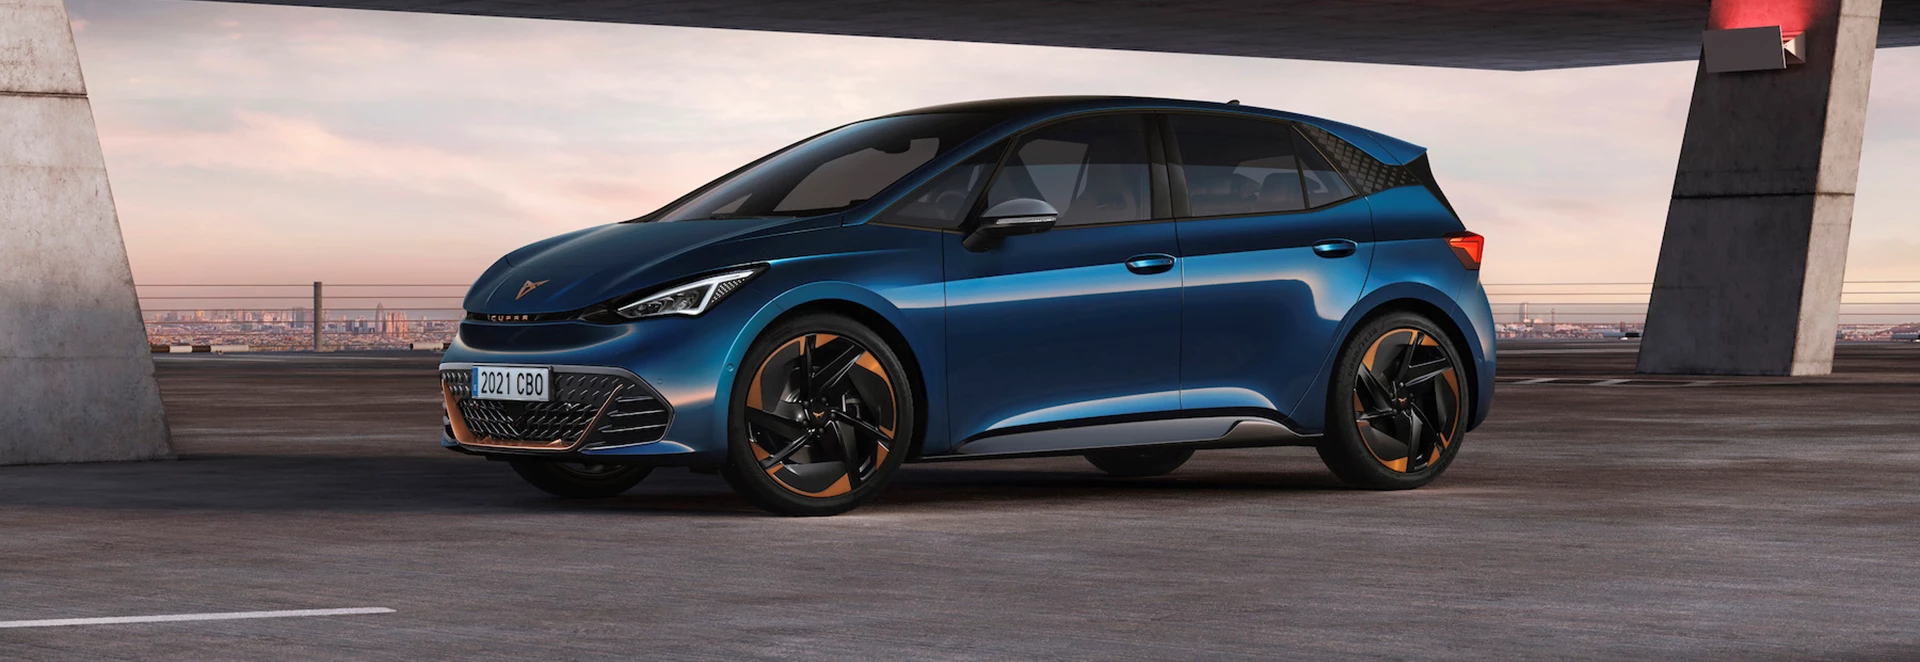 10 new cars to get excited about in 2022 